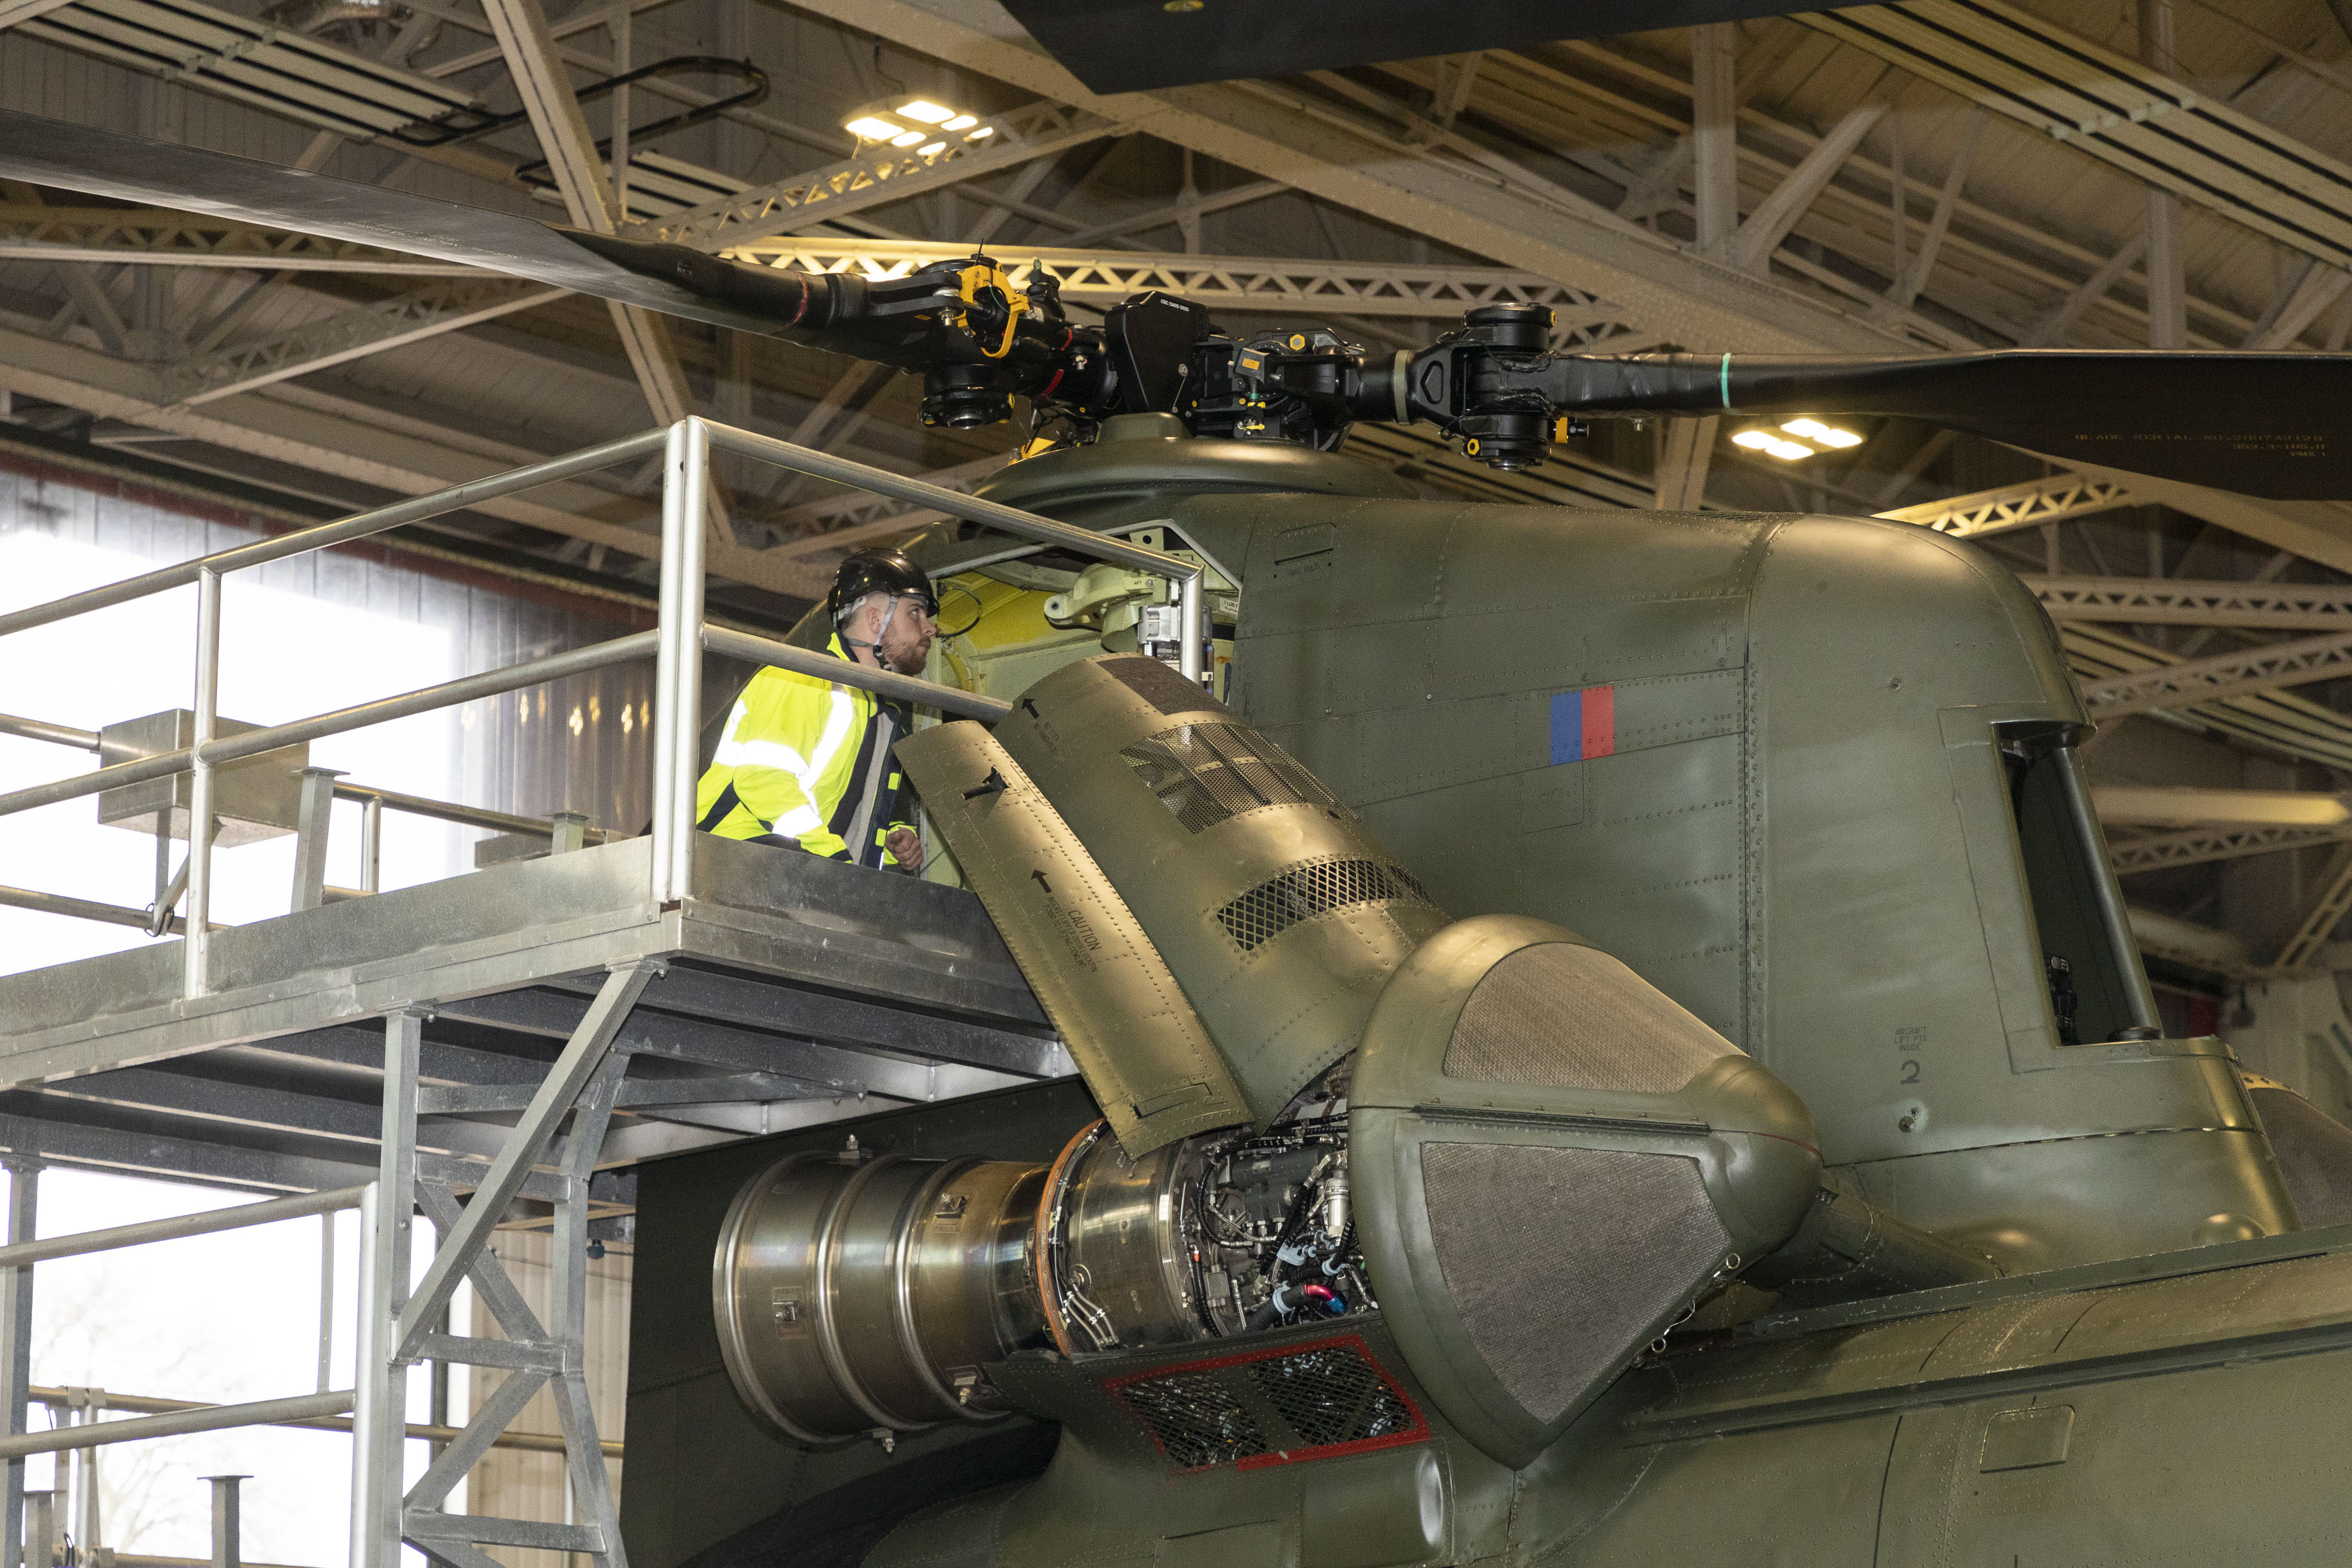 Image shows aviator checking helicopter parts in hangar.